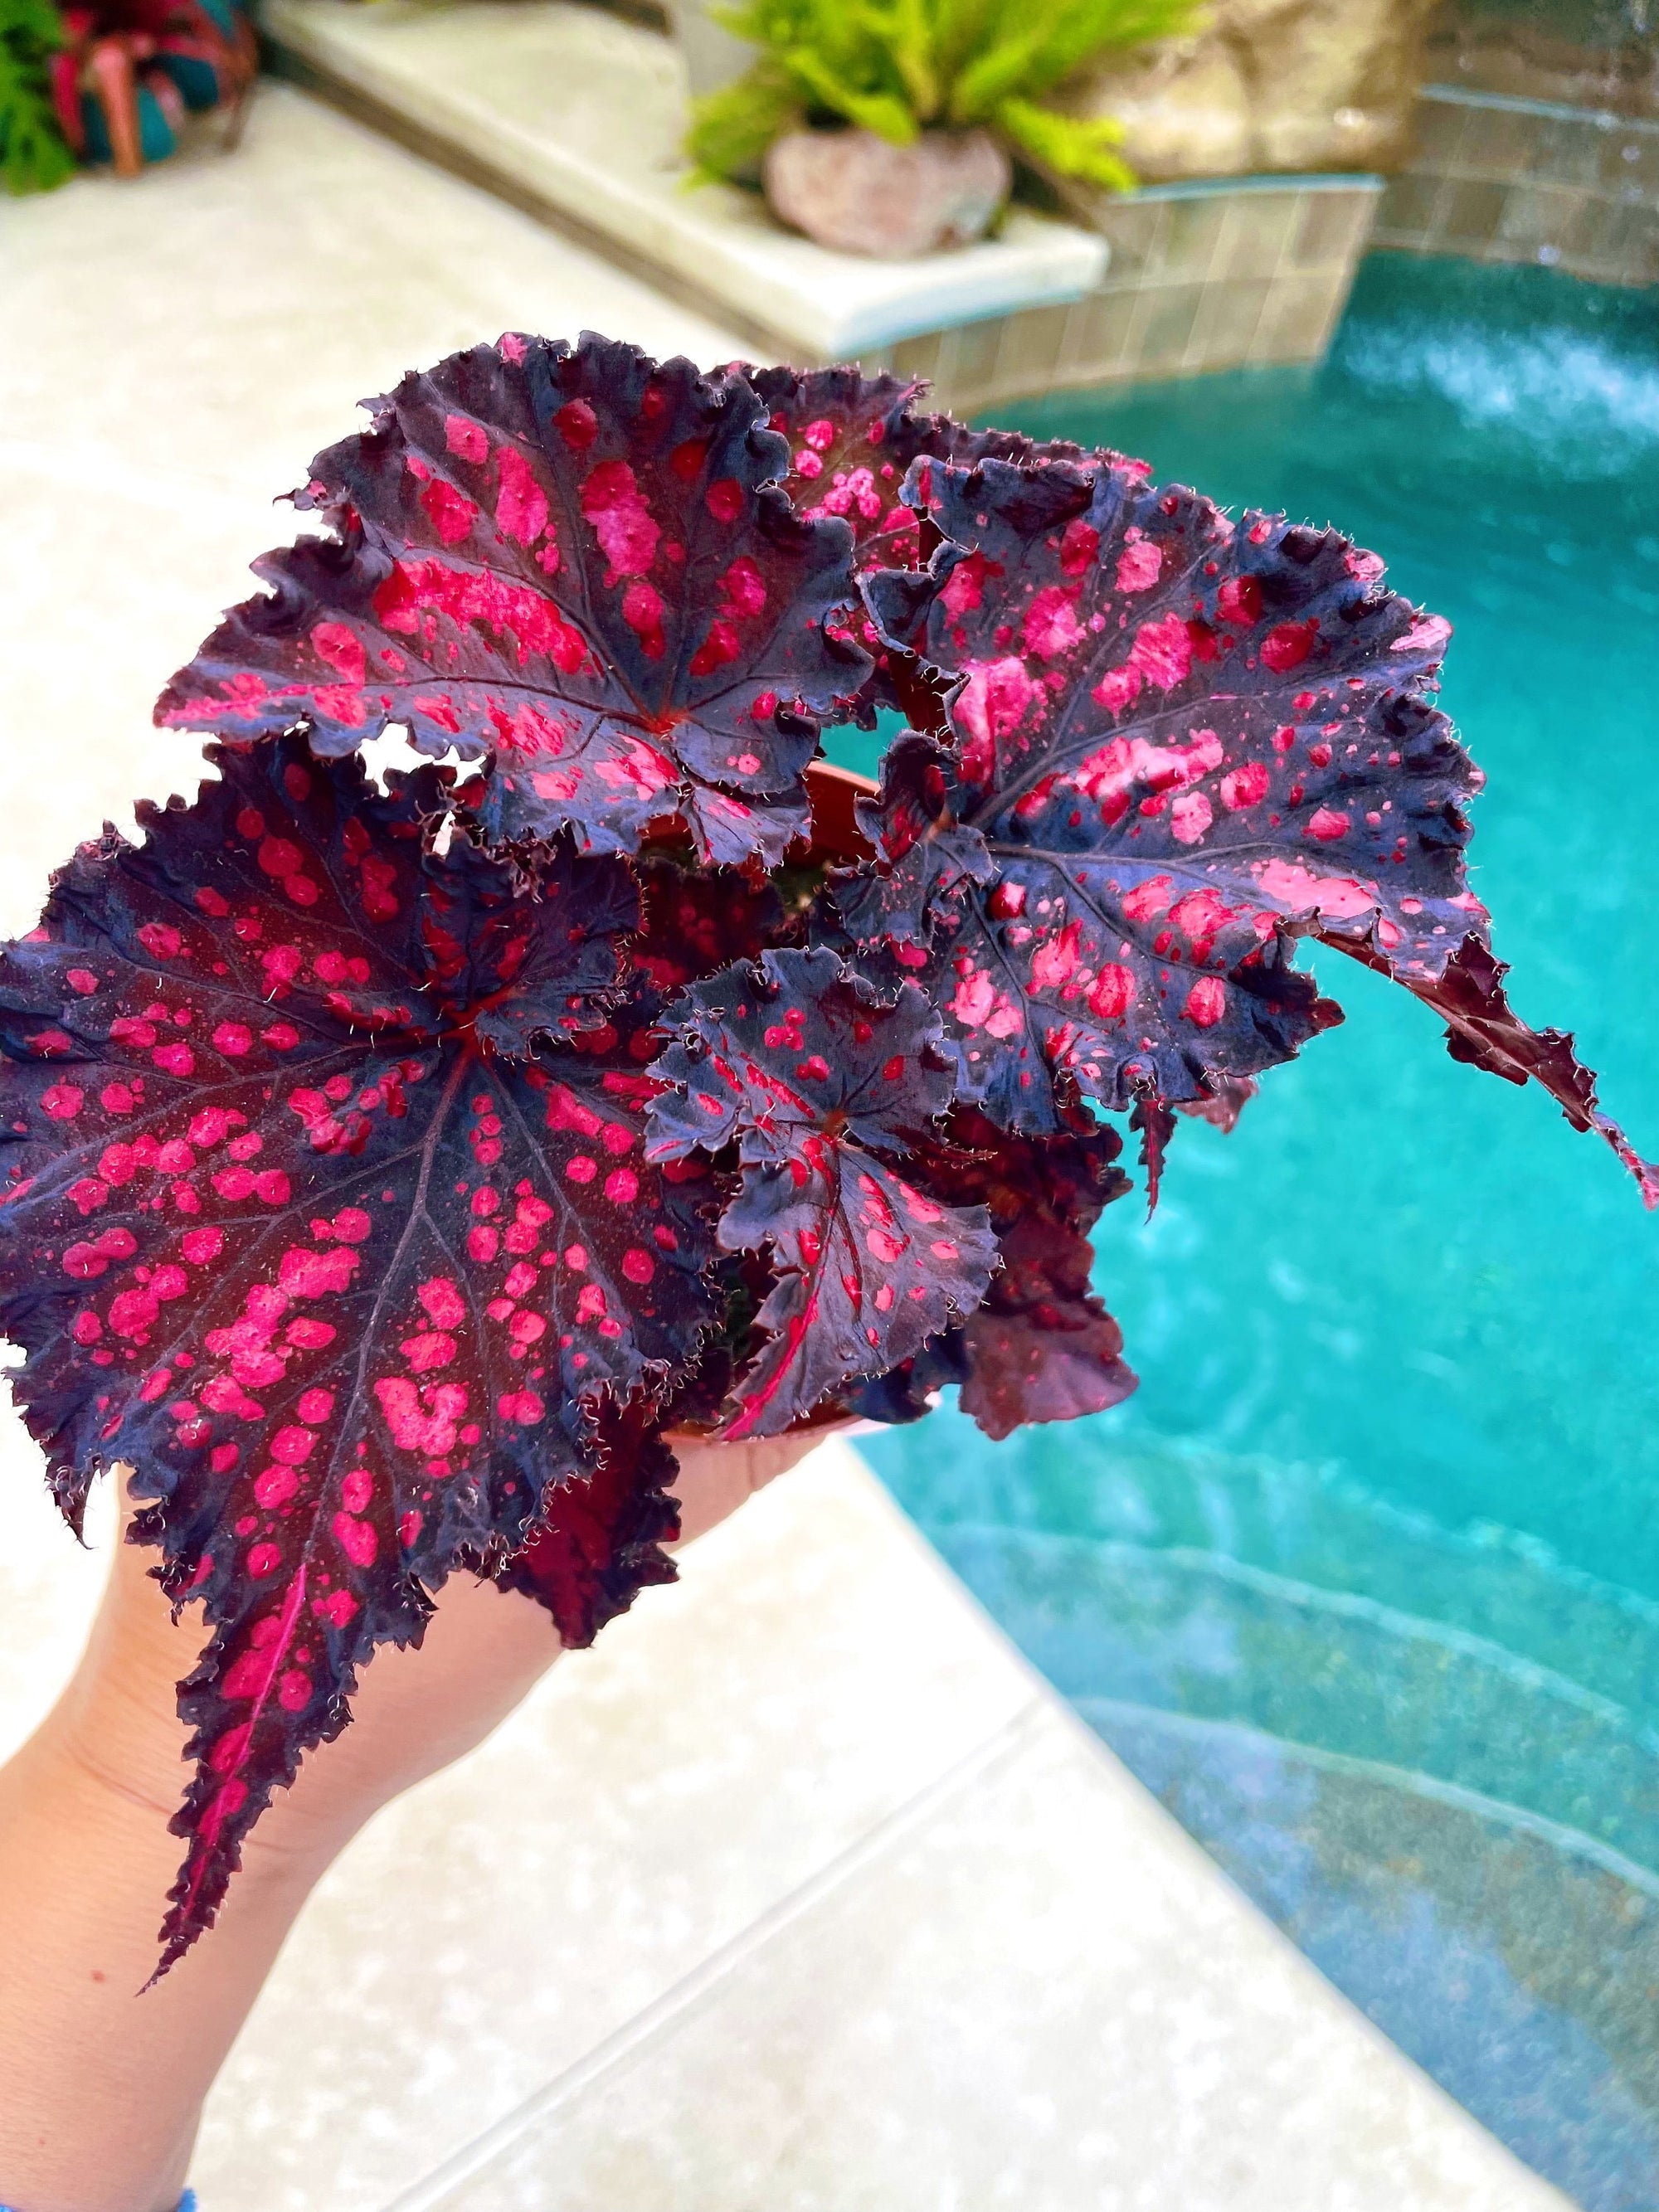 New Release - Begonia Rex Harmonys Dark Fantasy Black Red Live House Plant Potted 4 gift